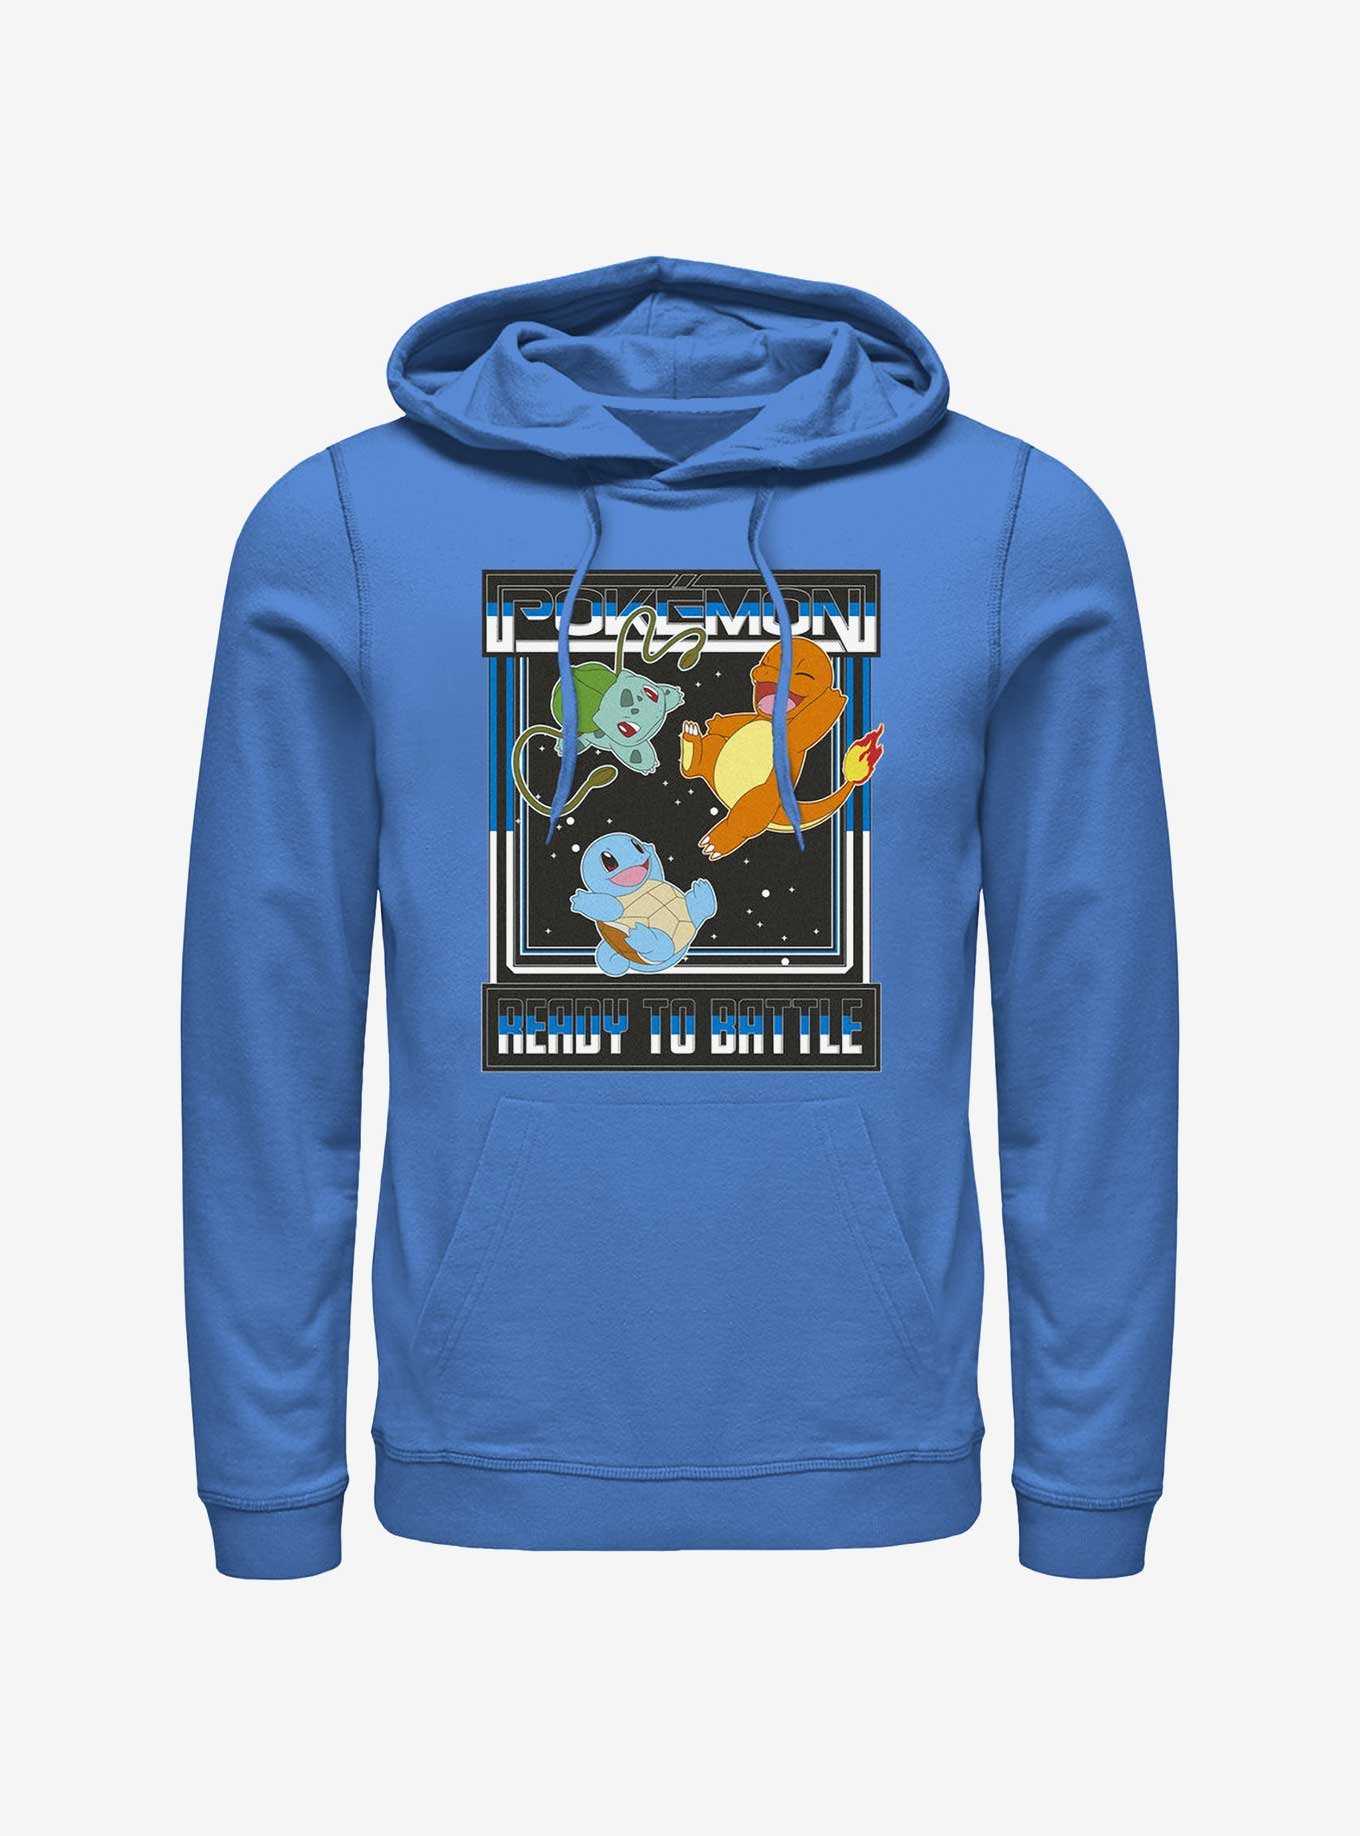 Pokemon Ready To Battle Squirtle, Bulbasaur, and Charmander Hoodie, , hi-res